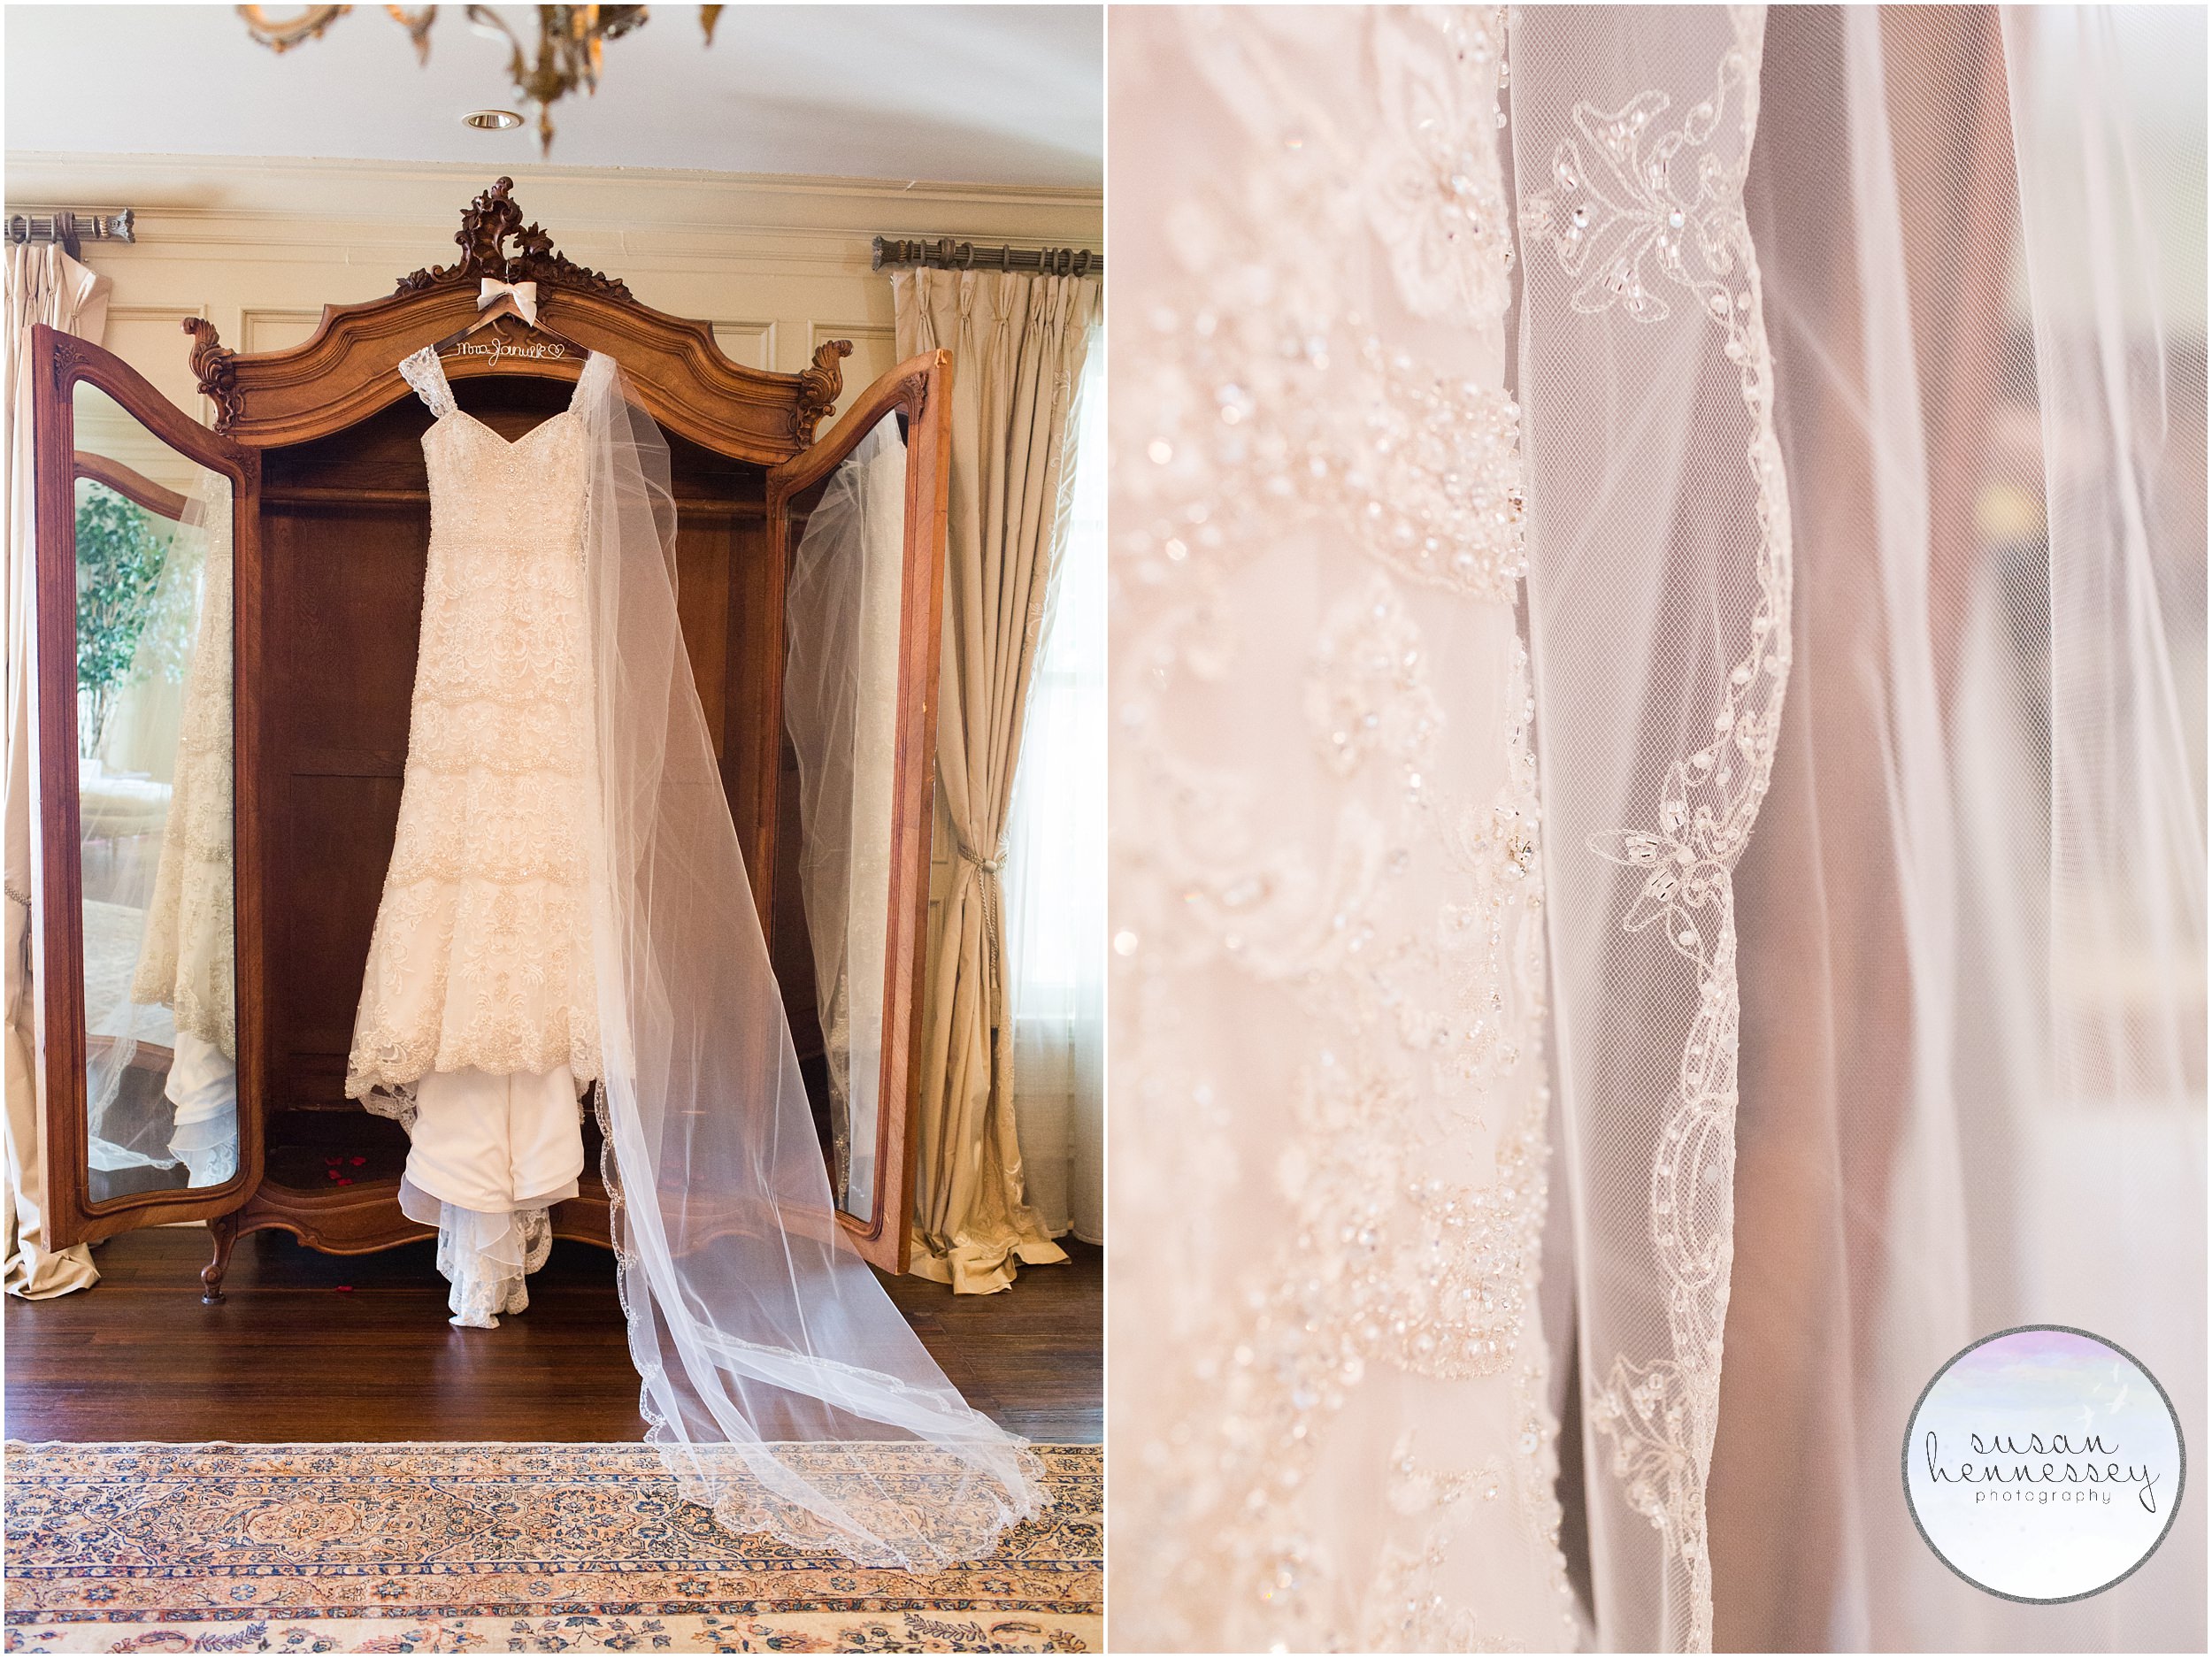 Wedding dress hanging in the bridal suite at the Park Savoy.